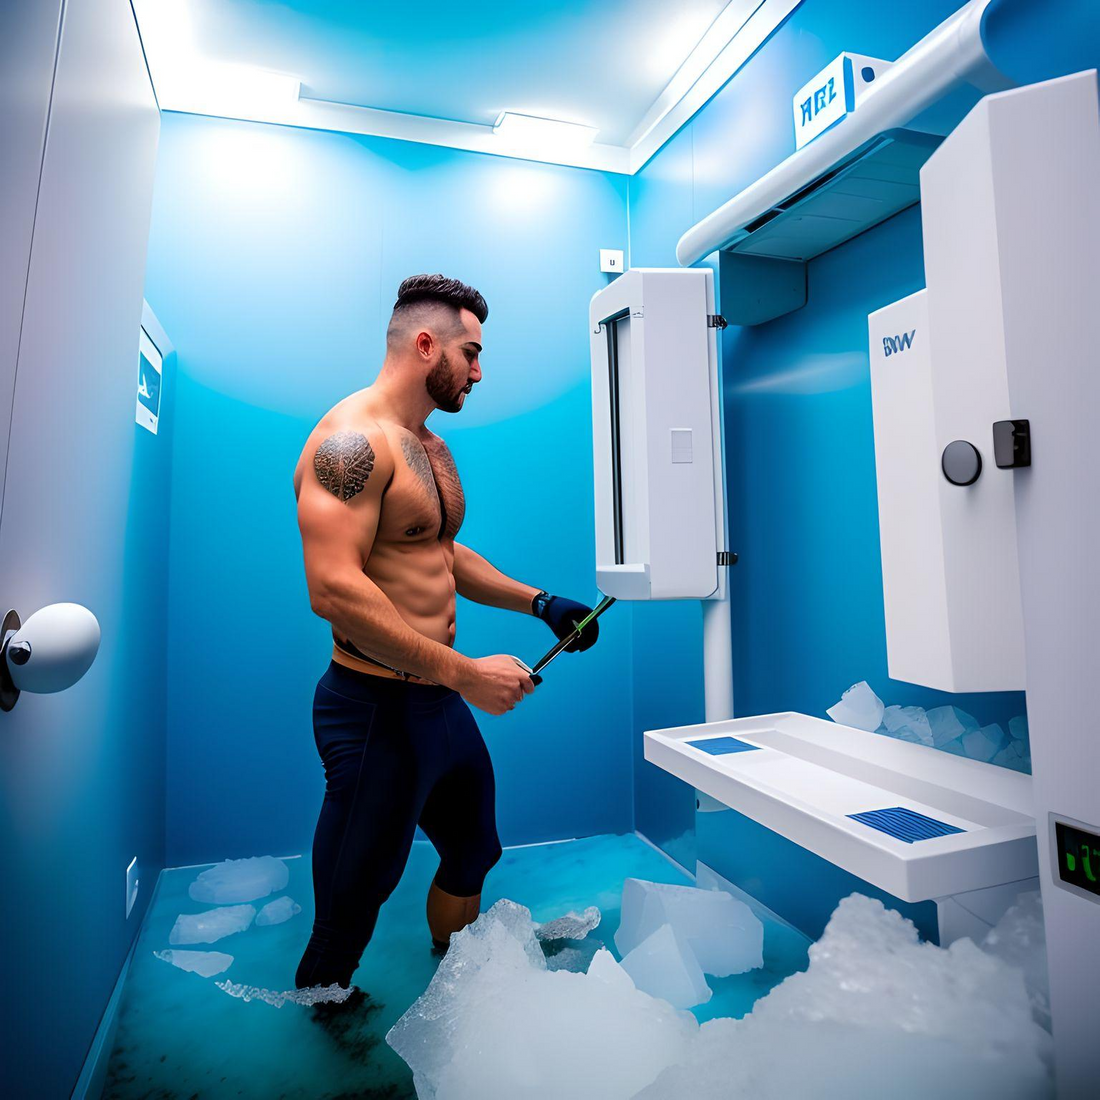 What is Cryotherapy?